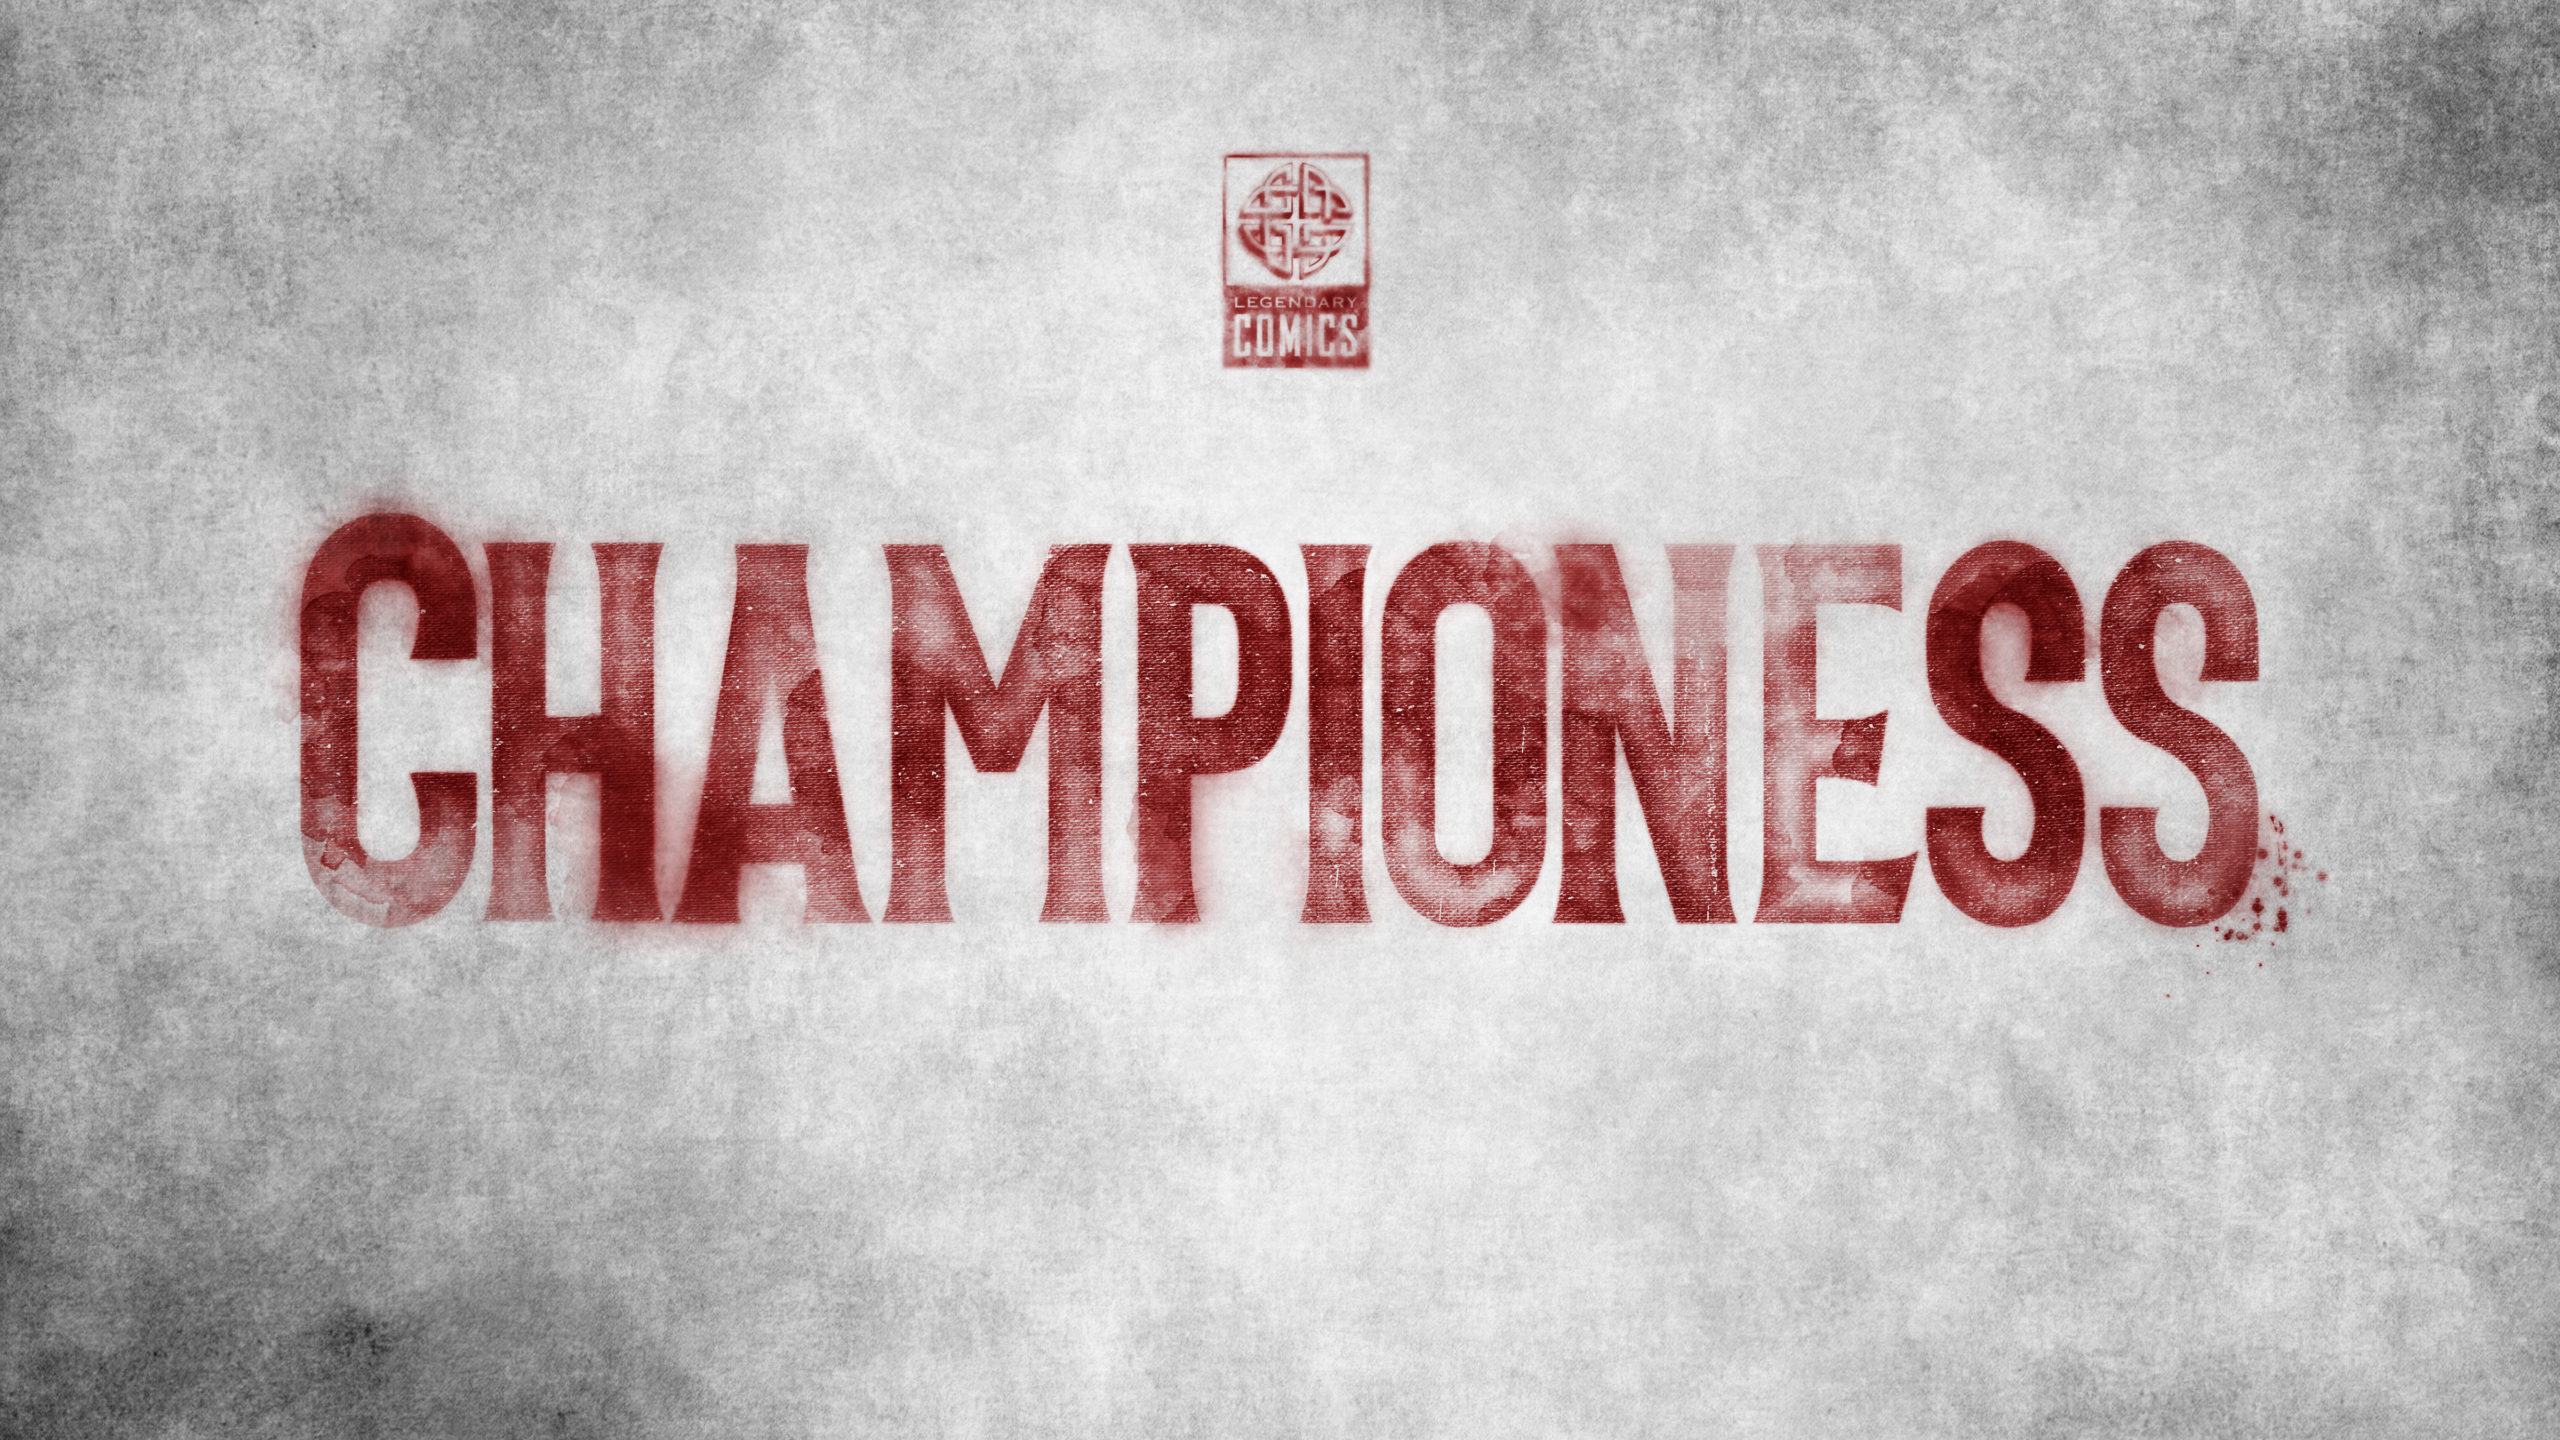 Legendary Comics Comes Out Swinging With A Championess Preview